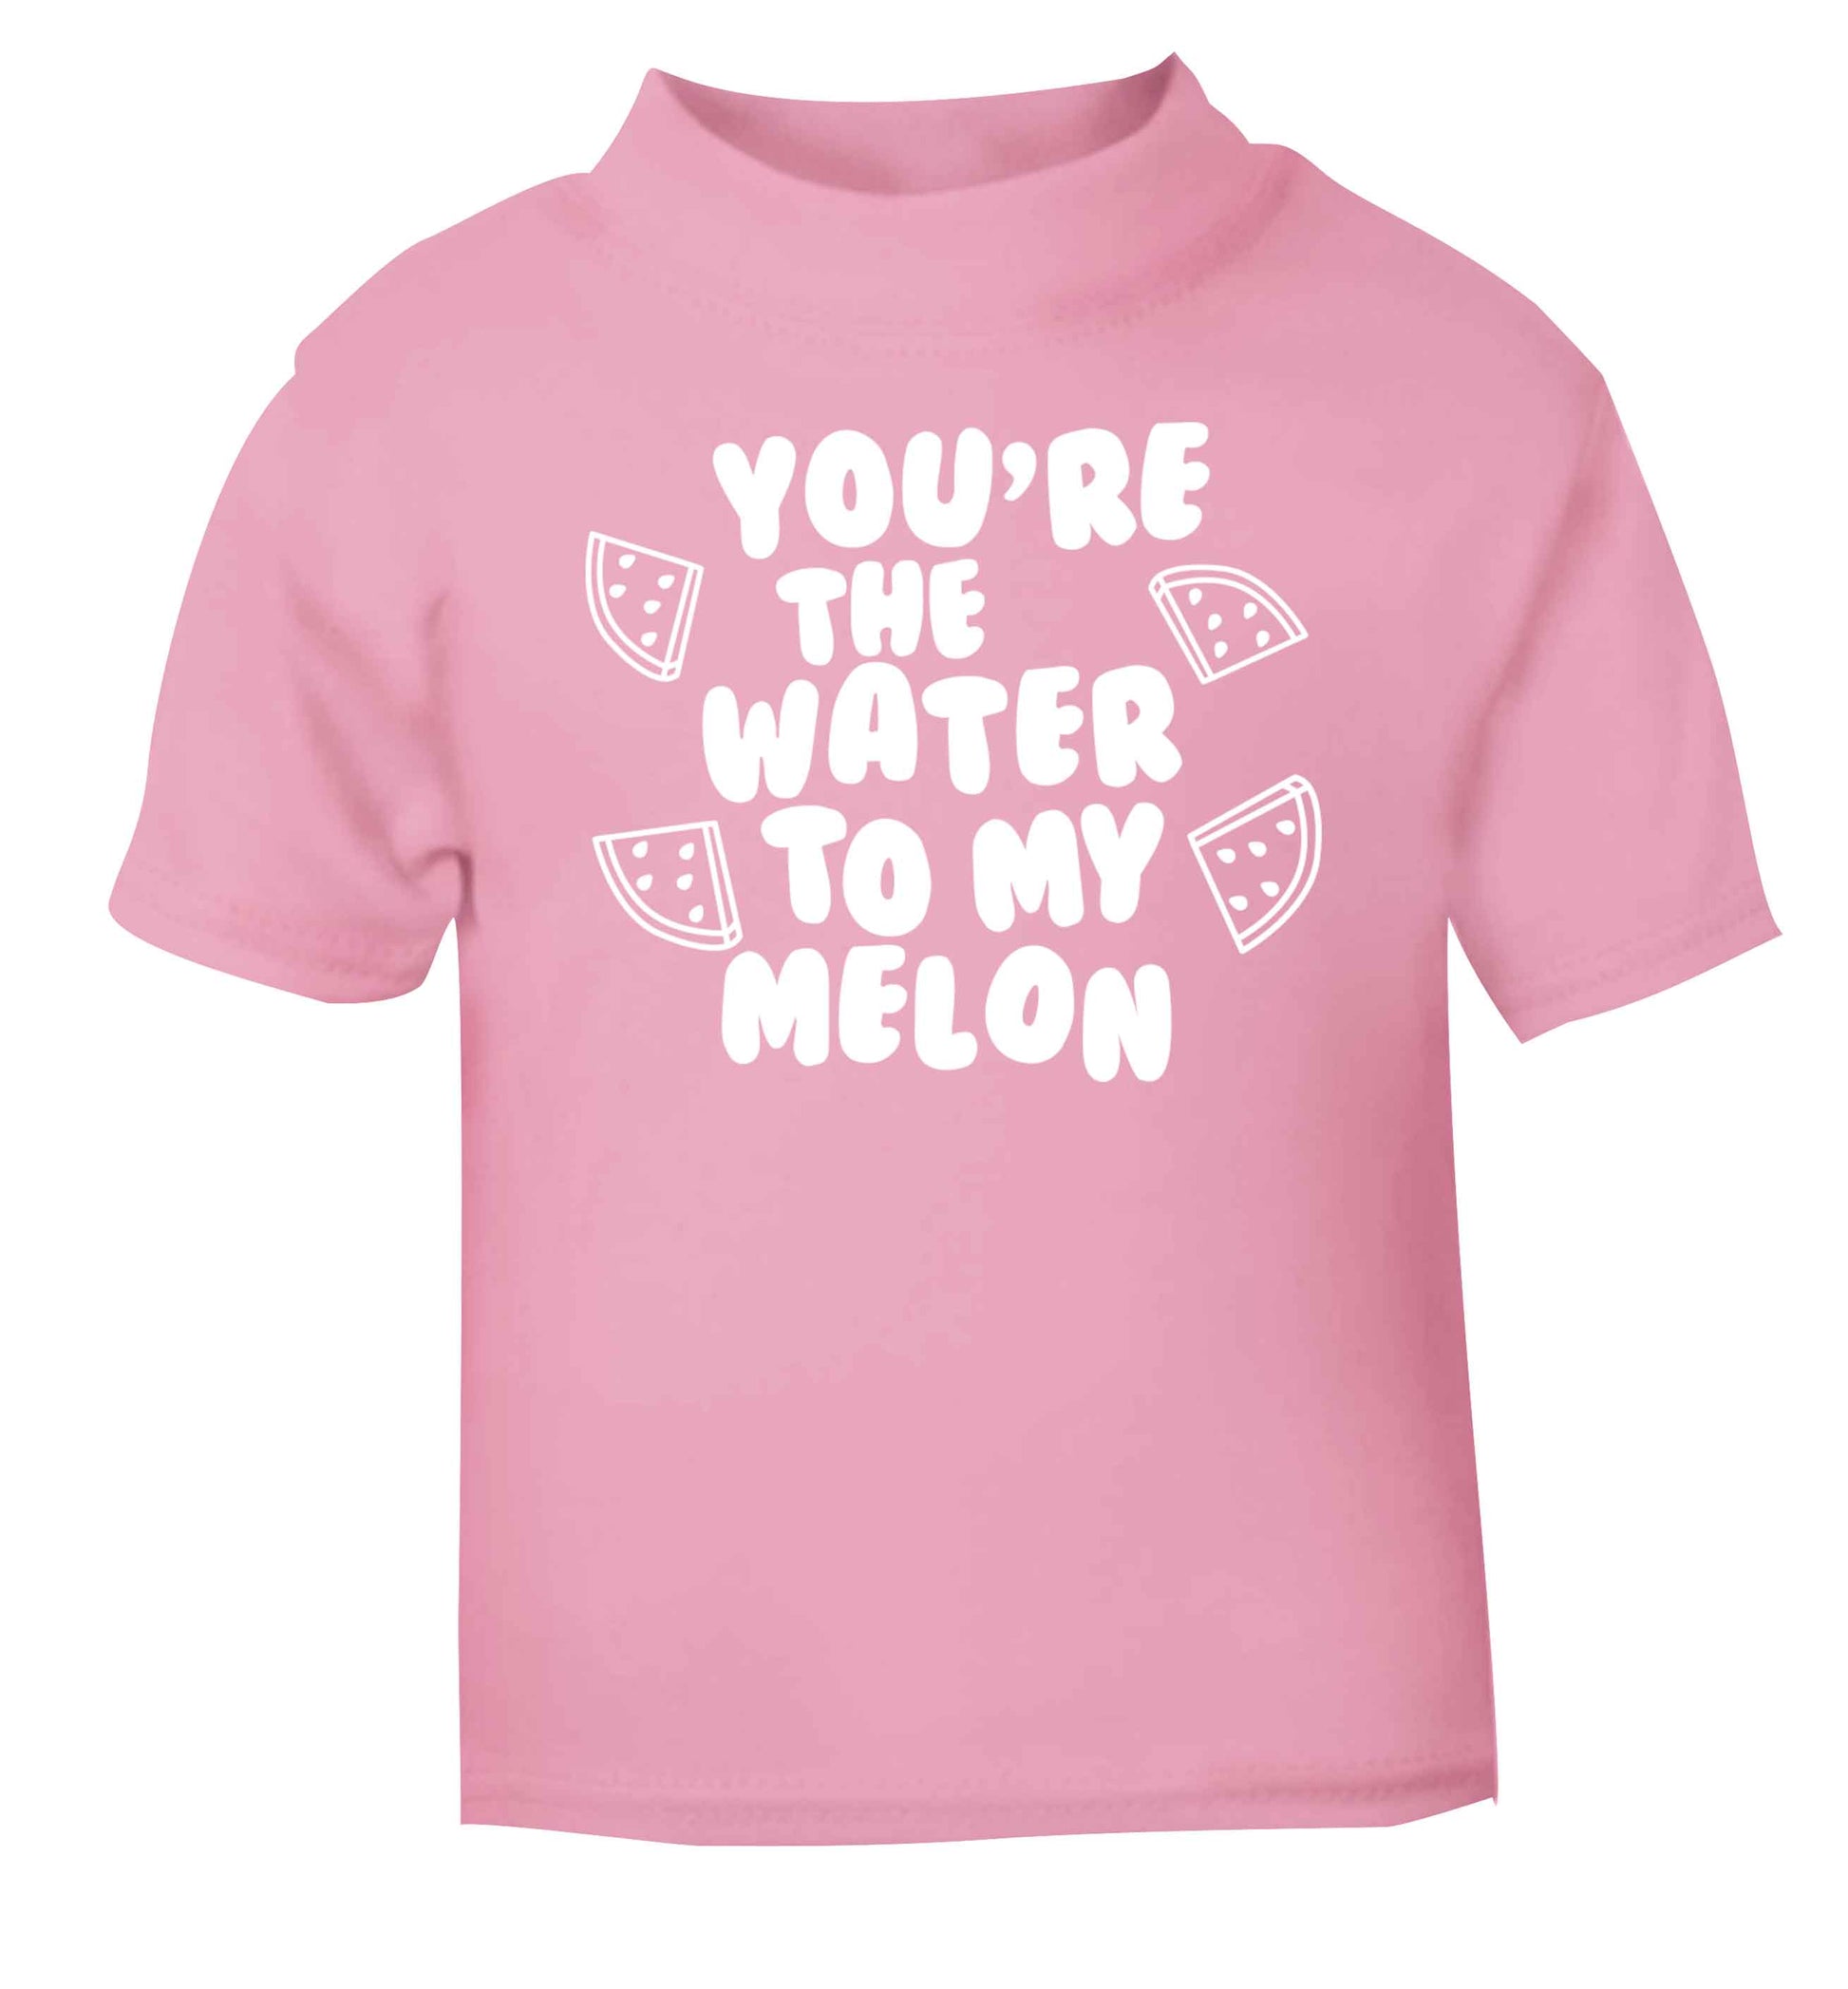 You're the water to my melon light pink baby toddler Tshirt 2 Years